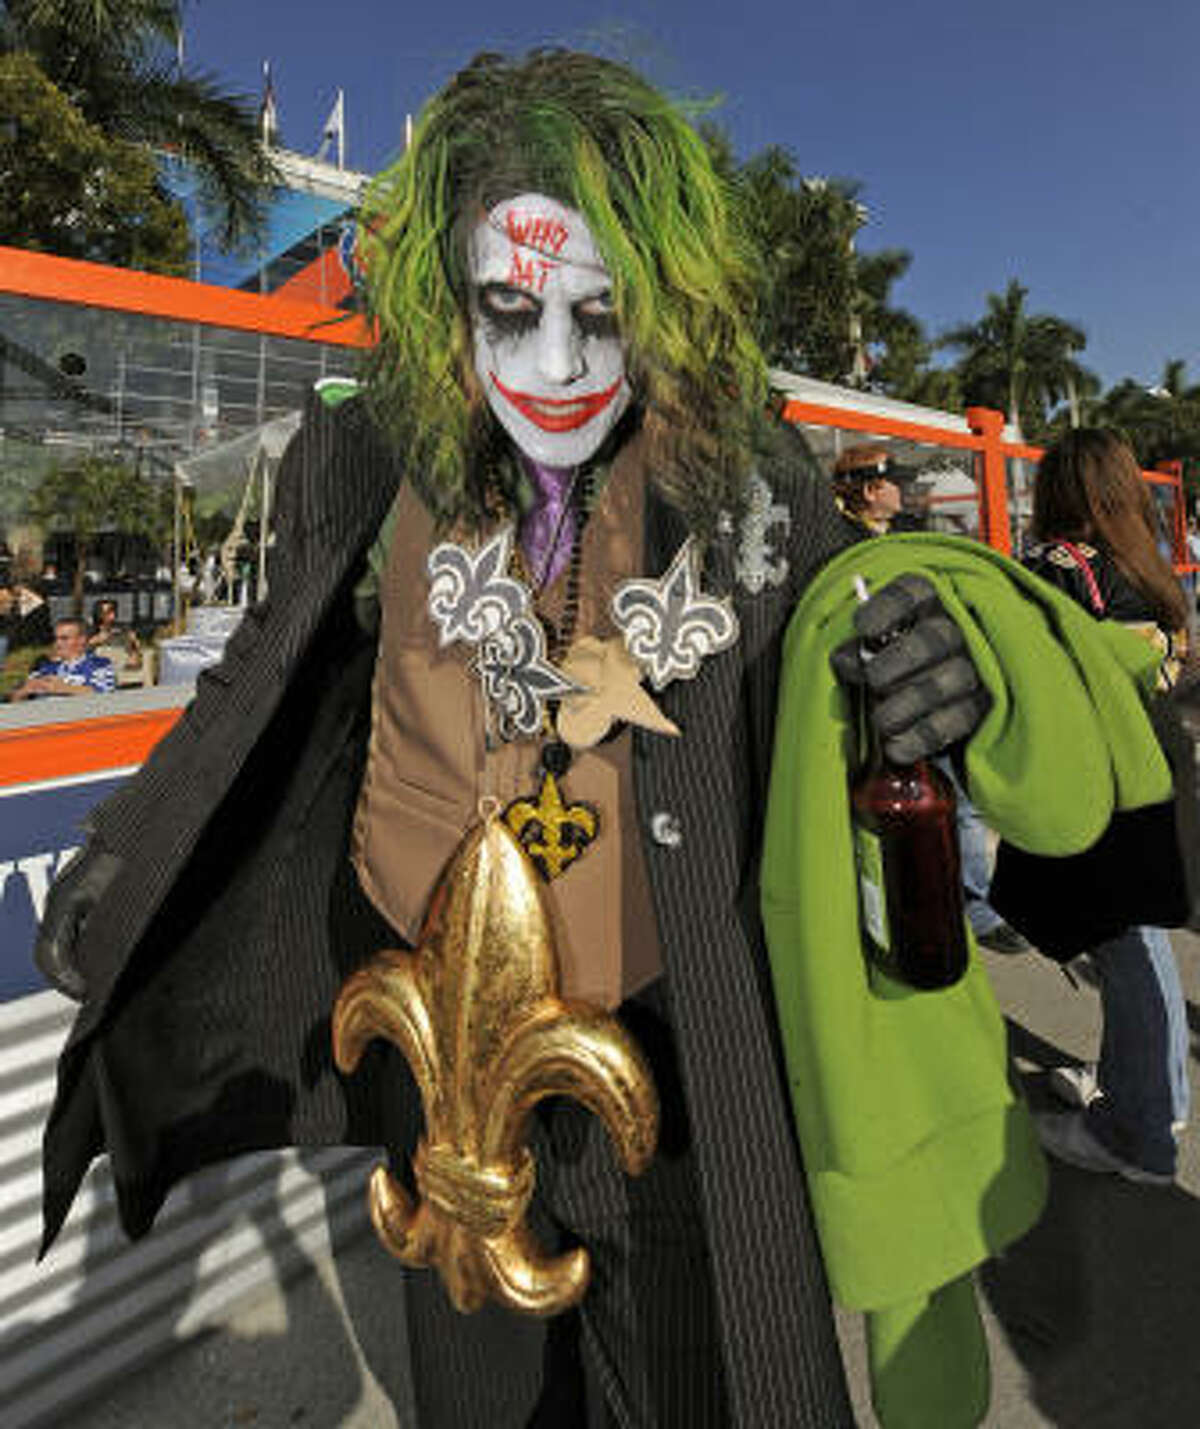 A Saints fan is dressed to thrill upon arriving at the stadium.